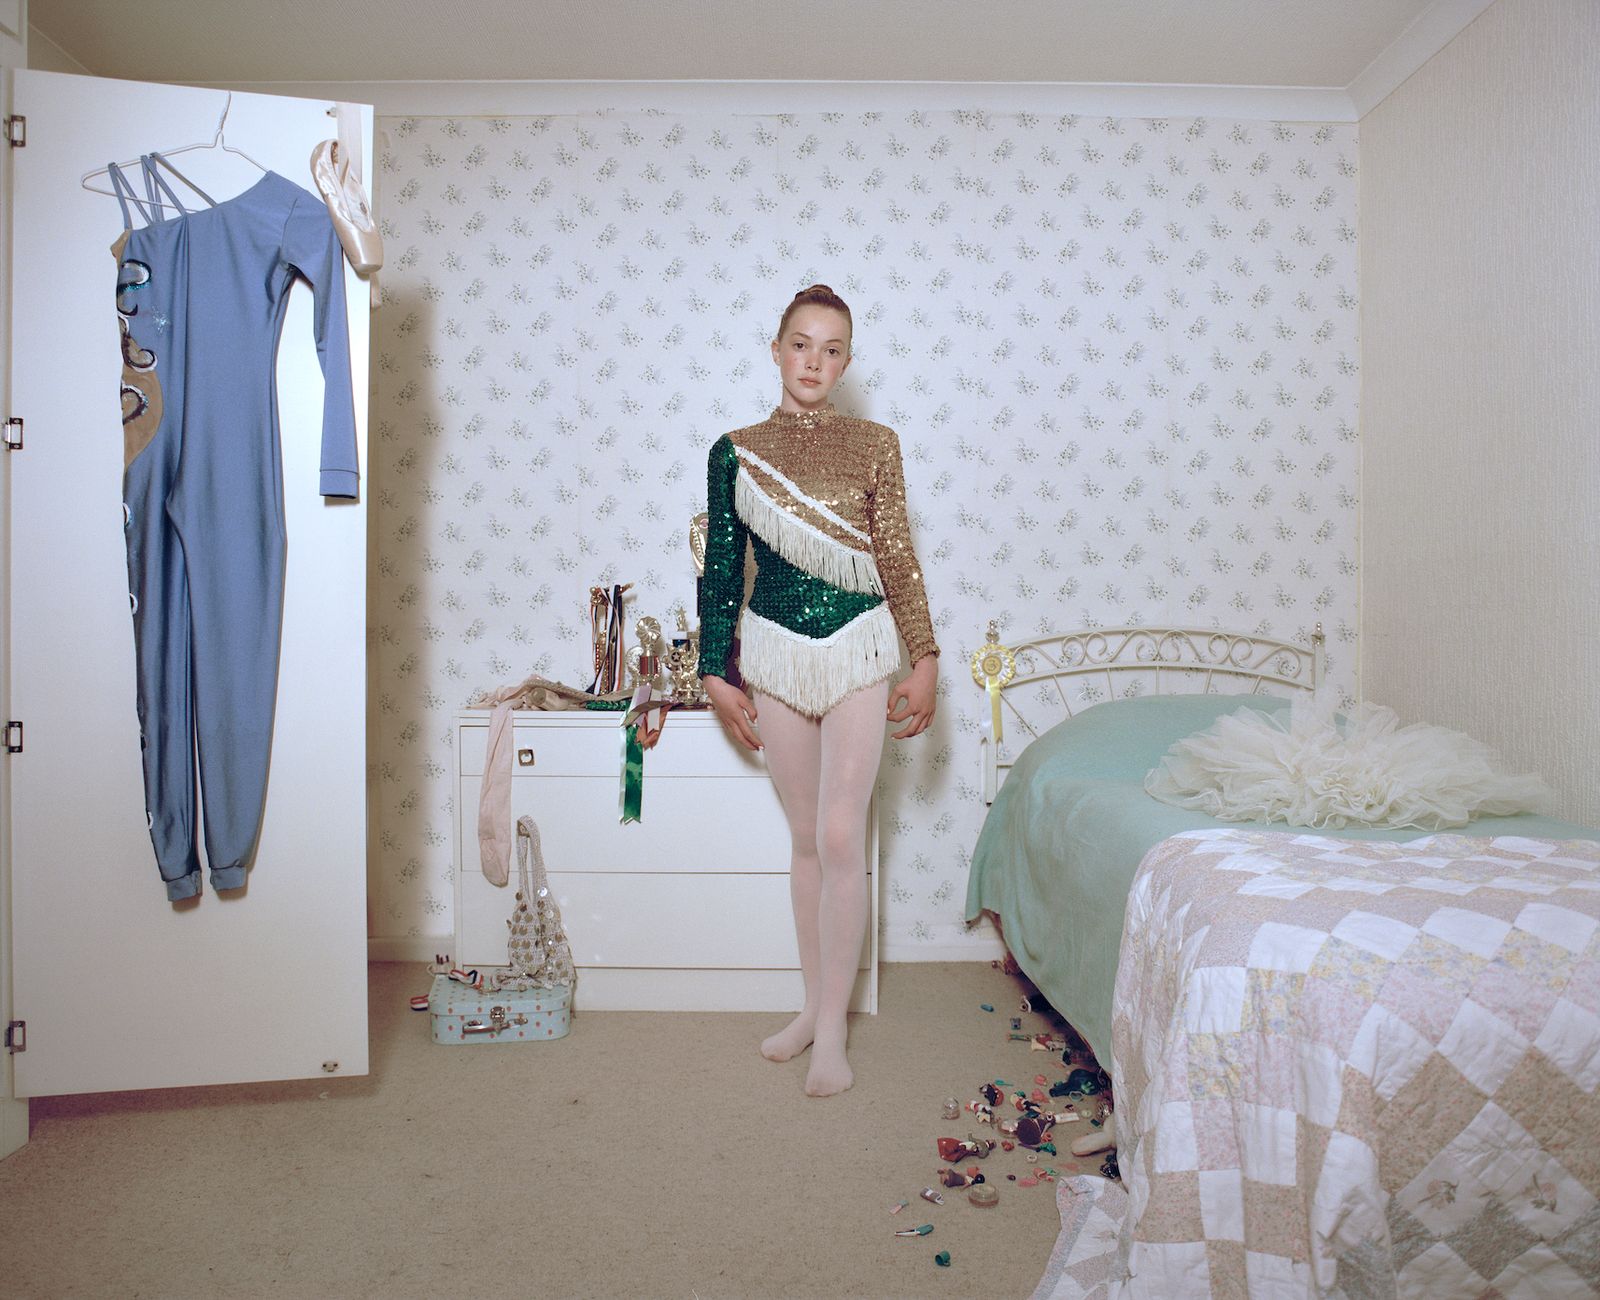 © Carina Kehlet Schou - Image from the My Stringbean, My Woman photography project